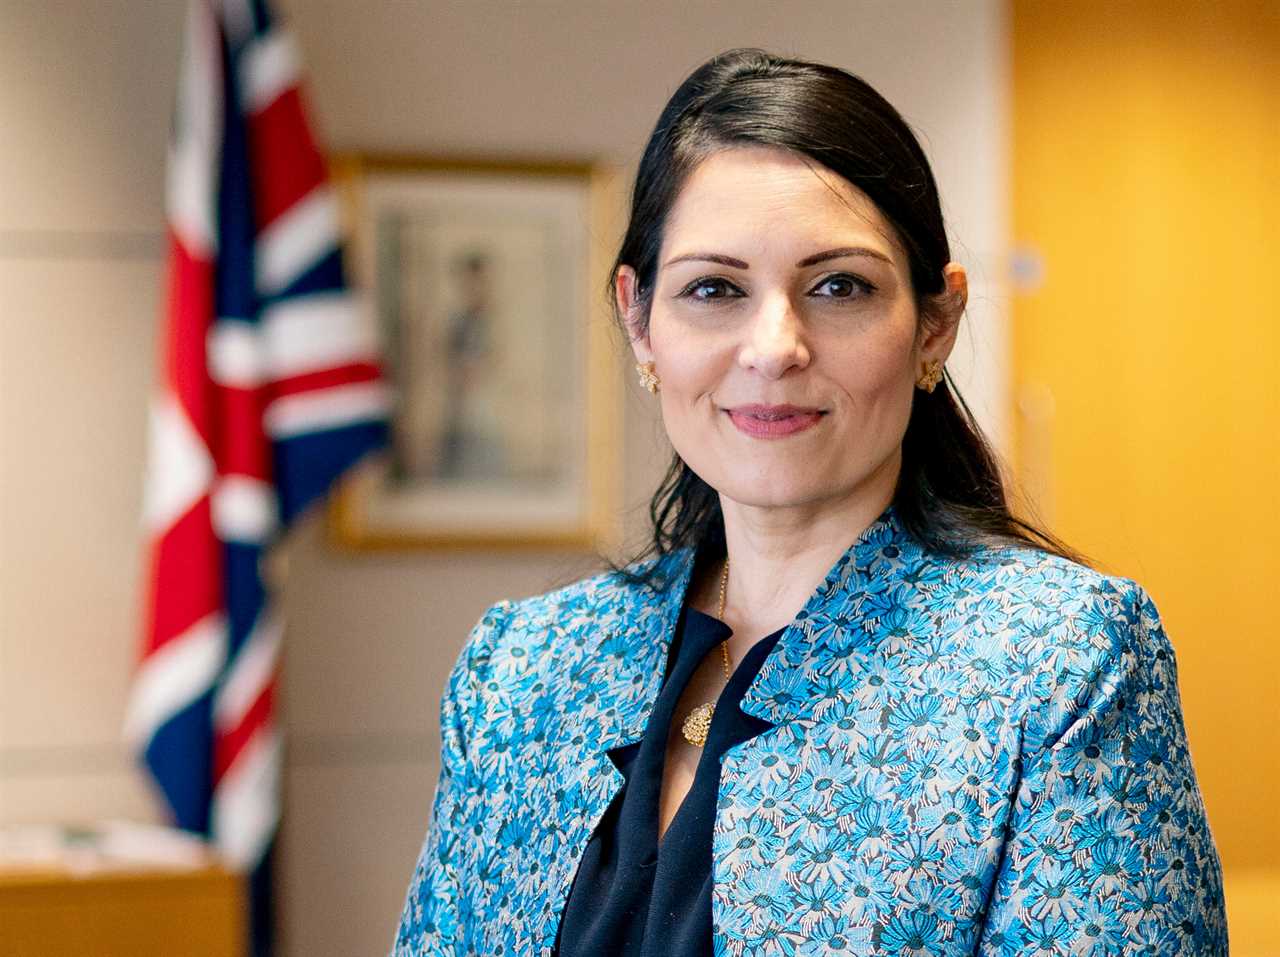 Priti Patel vows illegal immigrants landing on UK beaches face deportation in as little as 24 HOURS